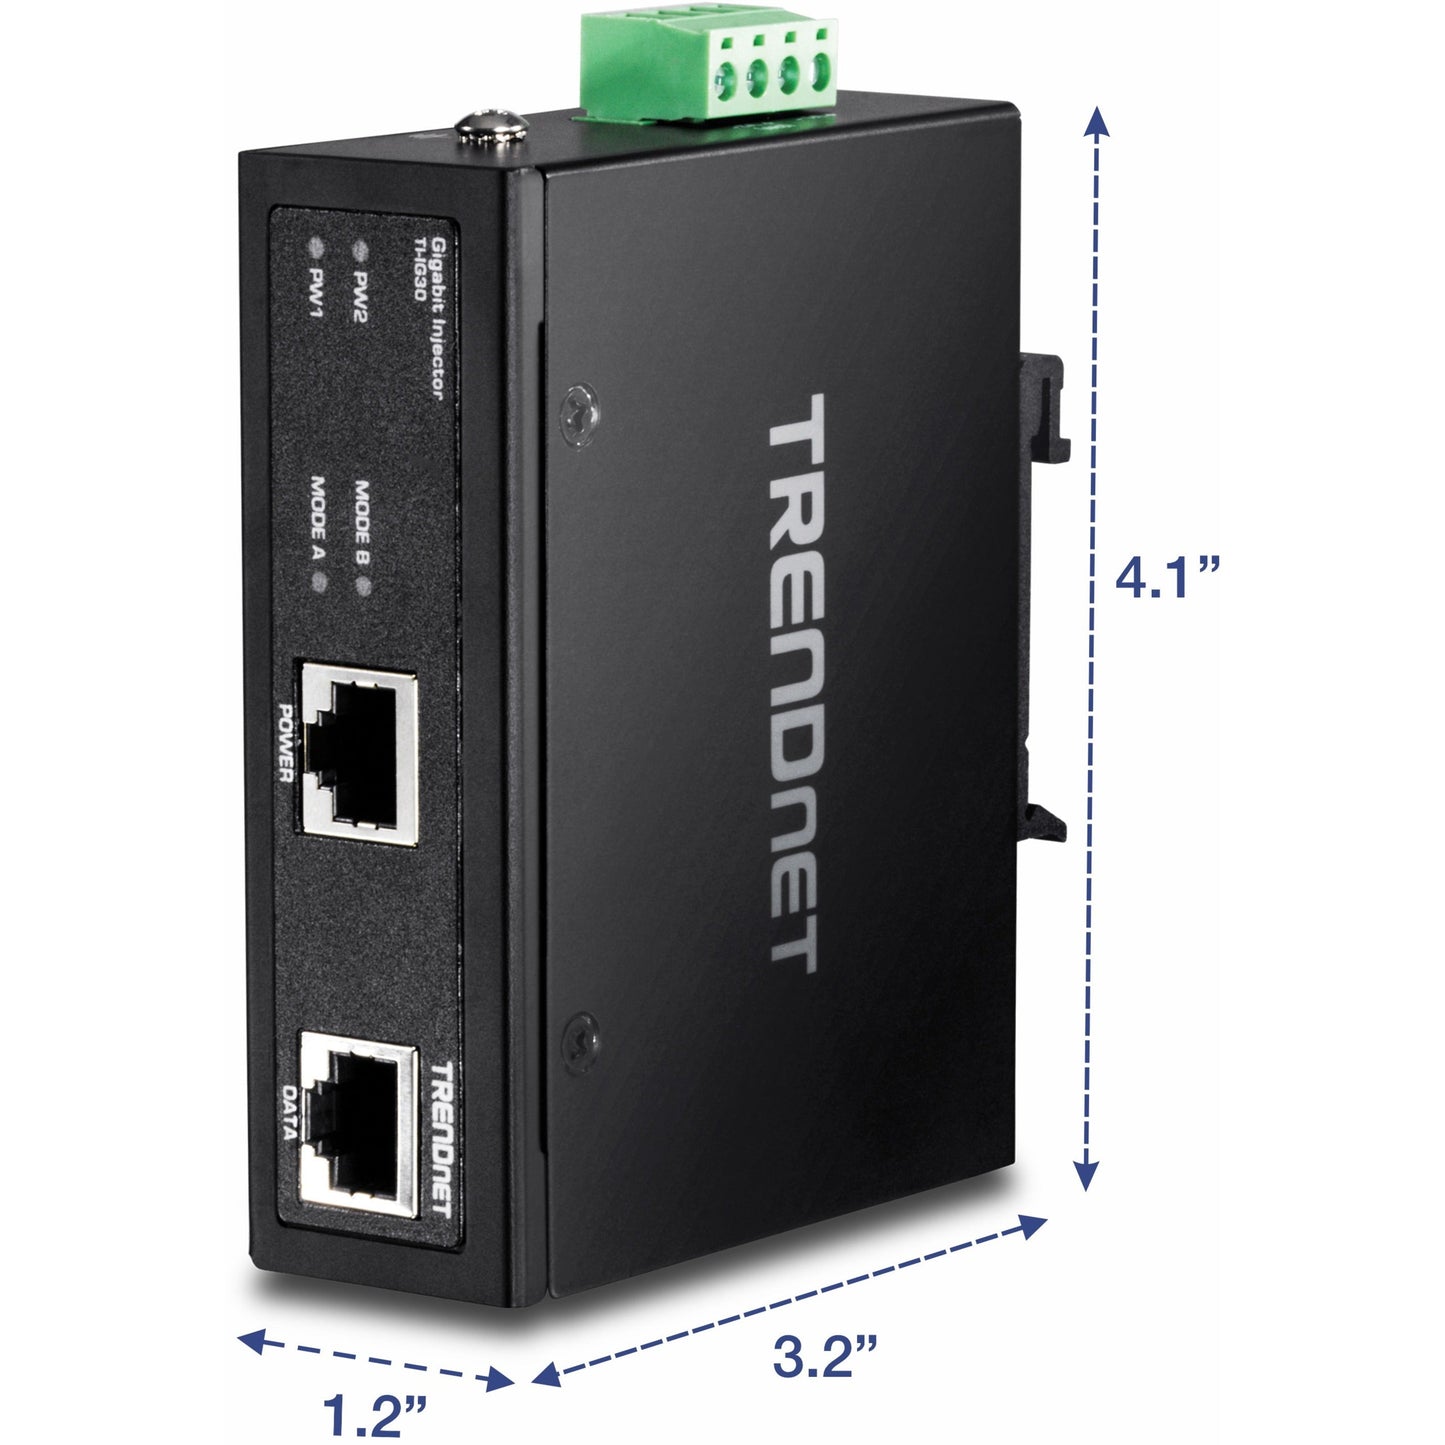 TRENDnet Hardened Industrial Gigabit PoE+ Injector DIN-Rail Wall Mount IP30 Rated Housing DIN-rail & Wall Mounts Included TI-IG30